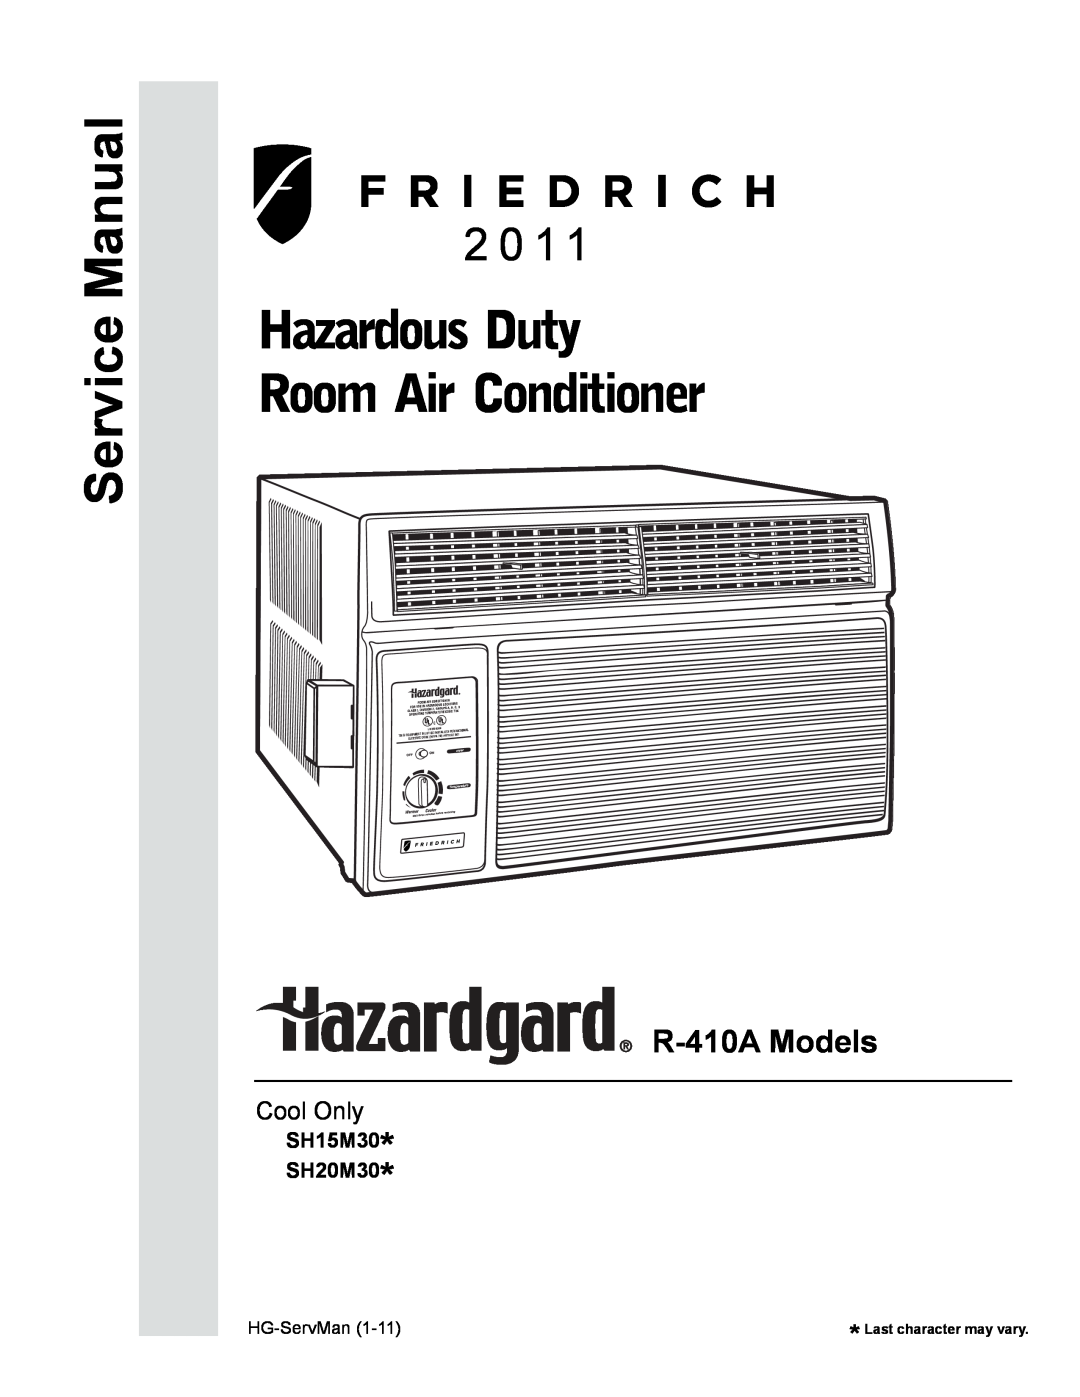 Friedrich service manual R-410AModels, Cool Only, Hazardous Duty Room Air Conditioner 